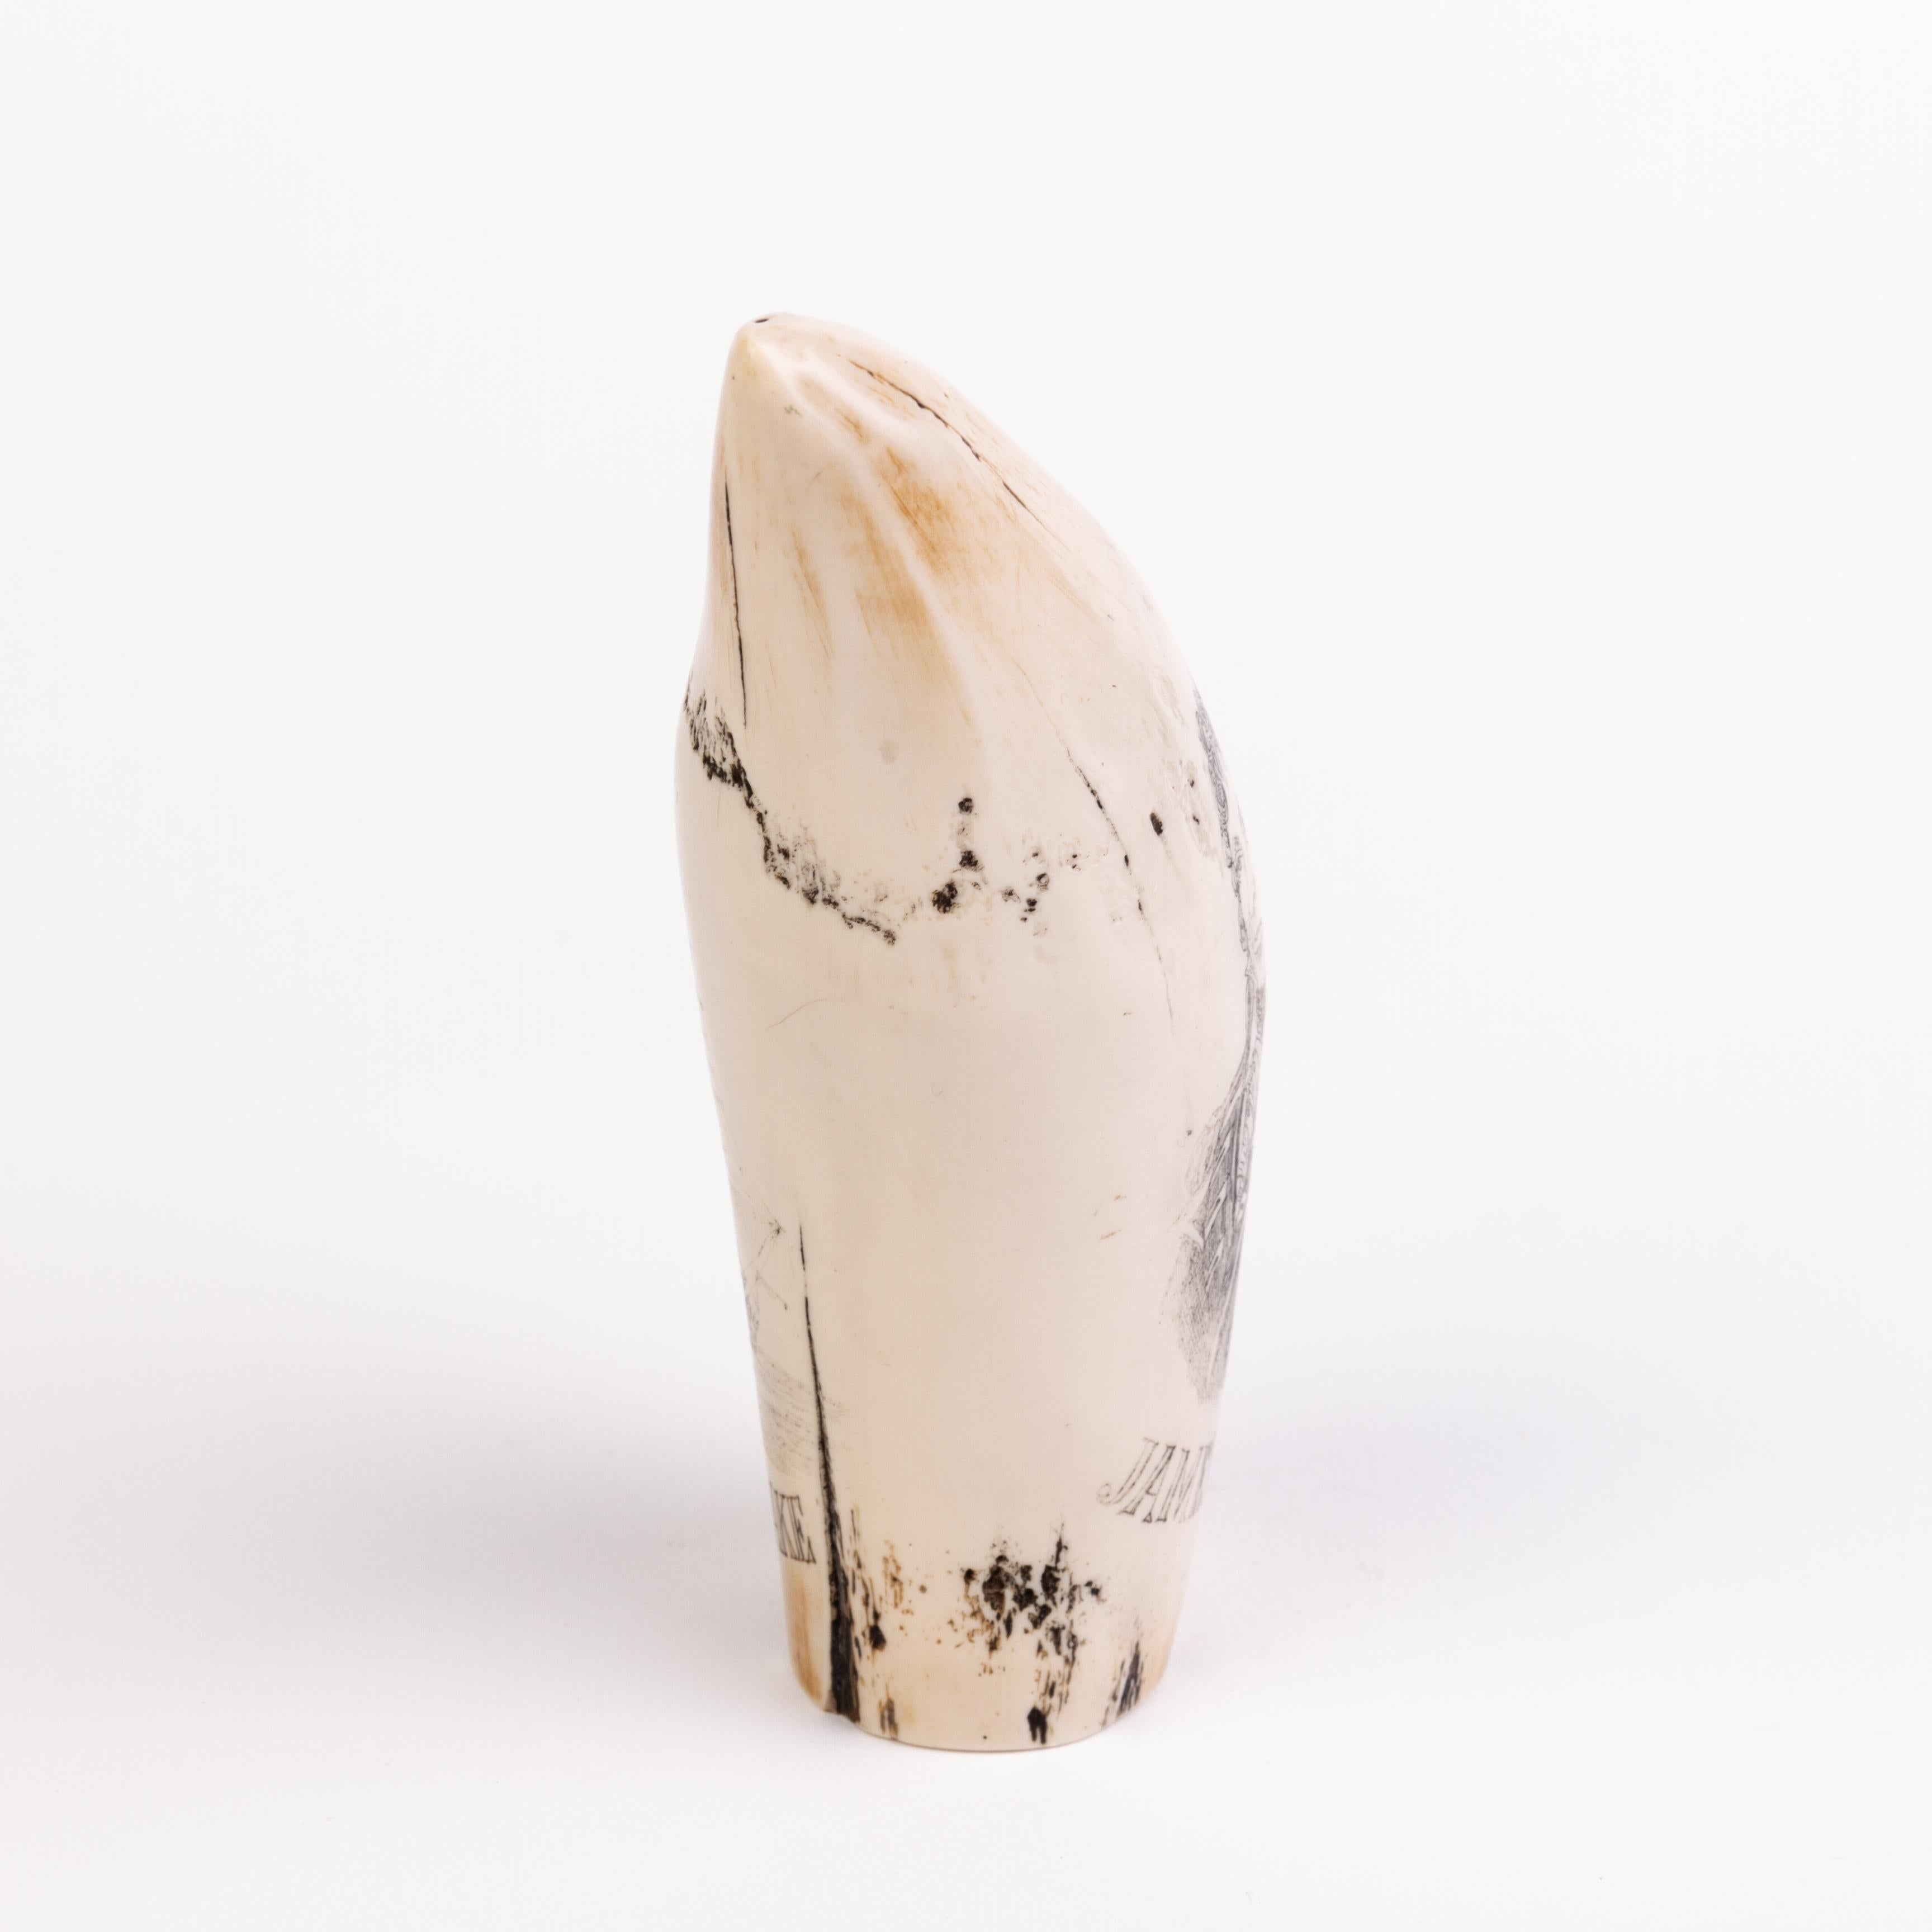 In good condition
From a private collection
Free international shipping
Sperm Whale Scrimshaw Nautical Faux Tooth 